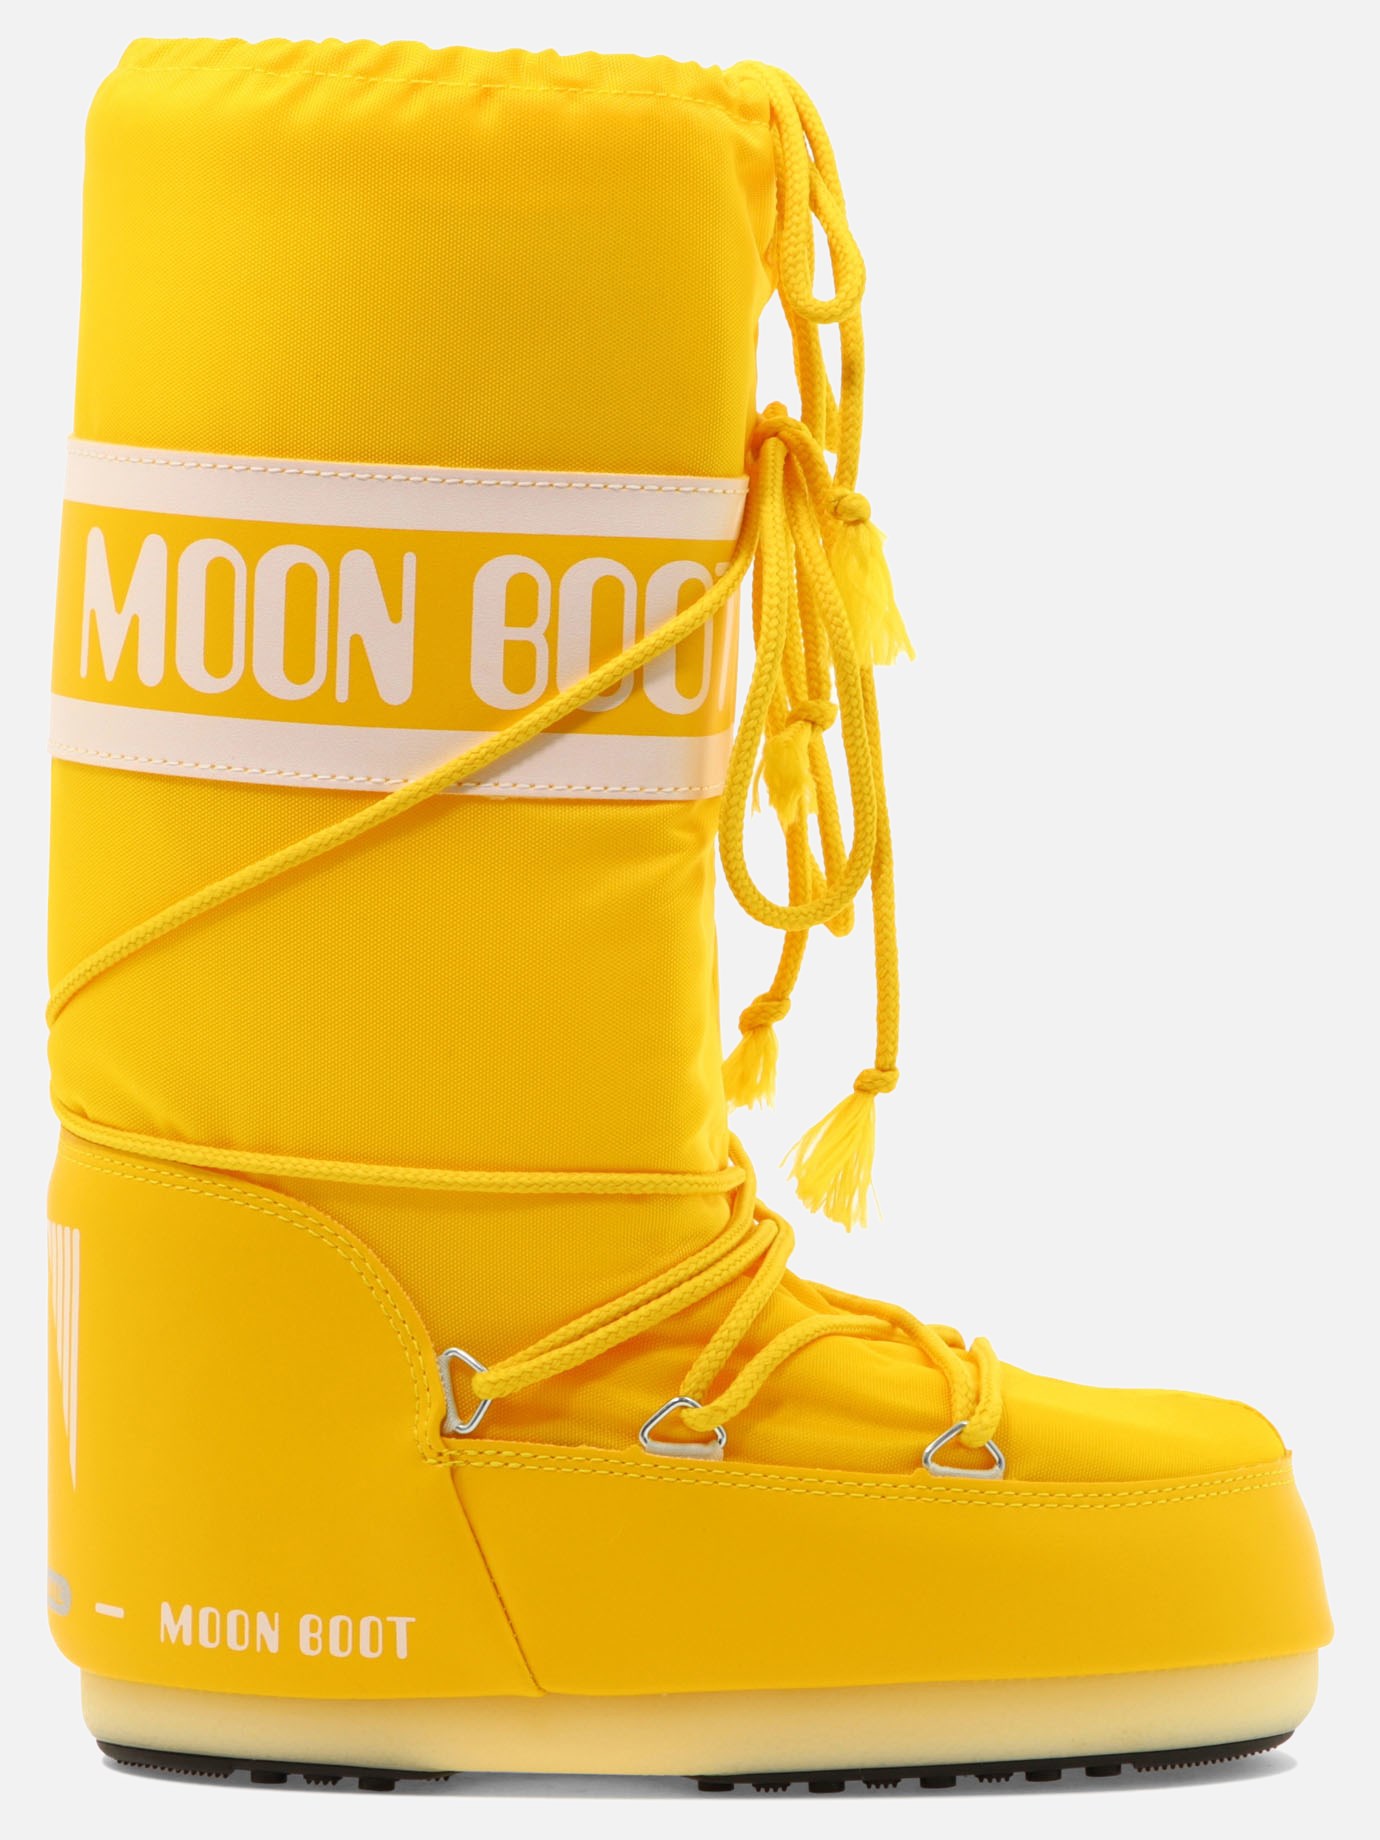  Nylon  after-ski bootsby Moon Boot - 3